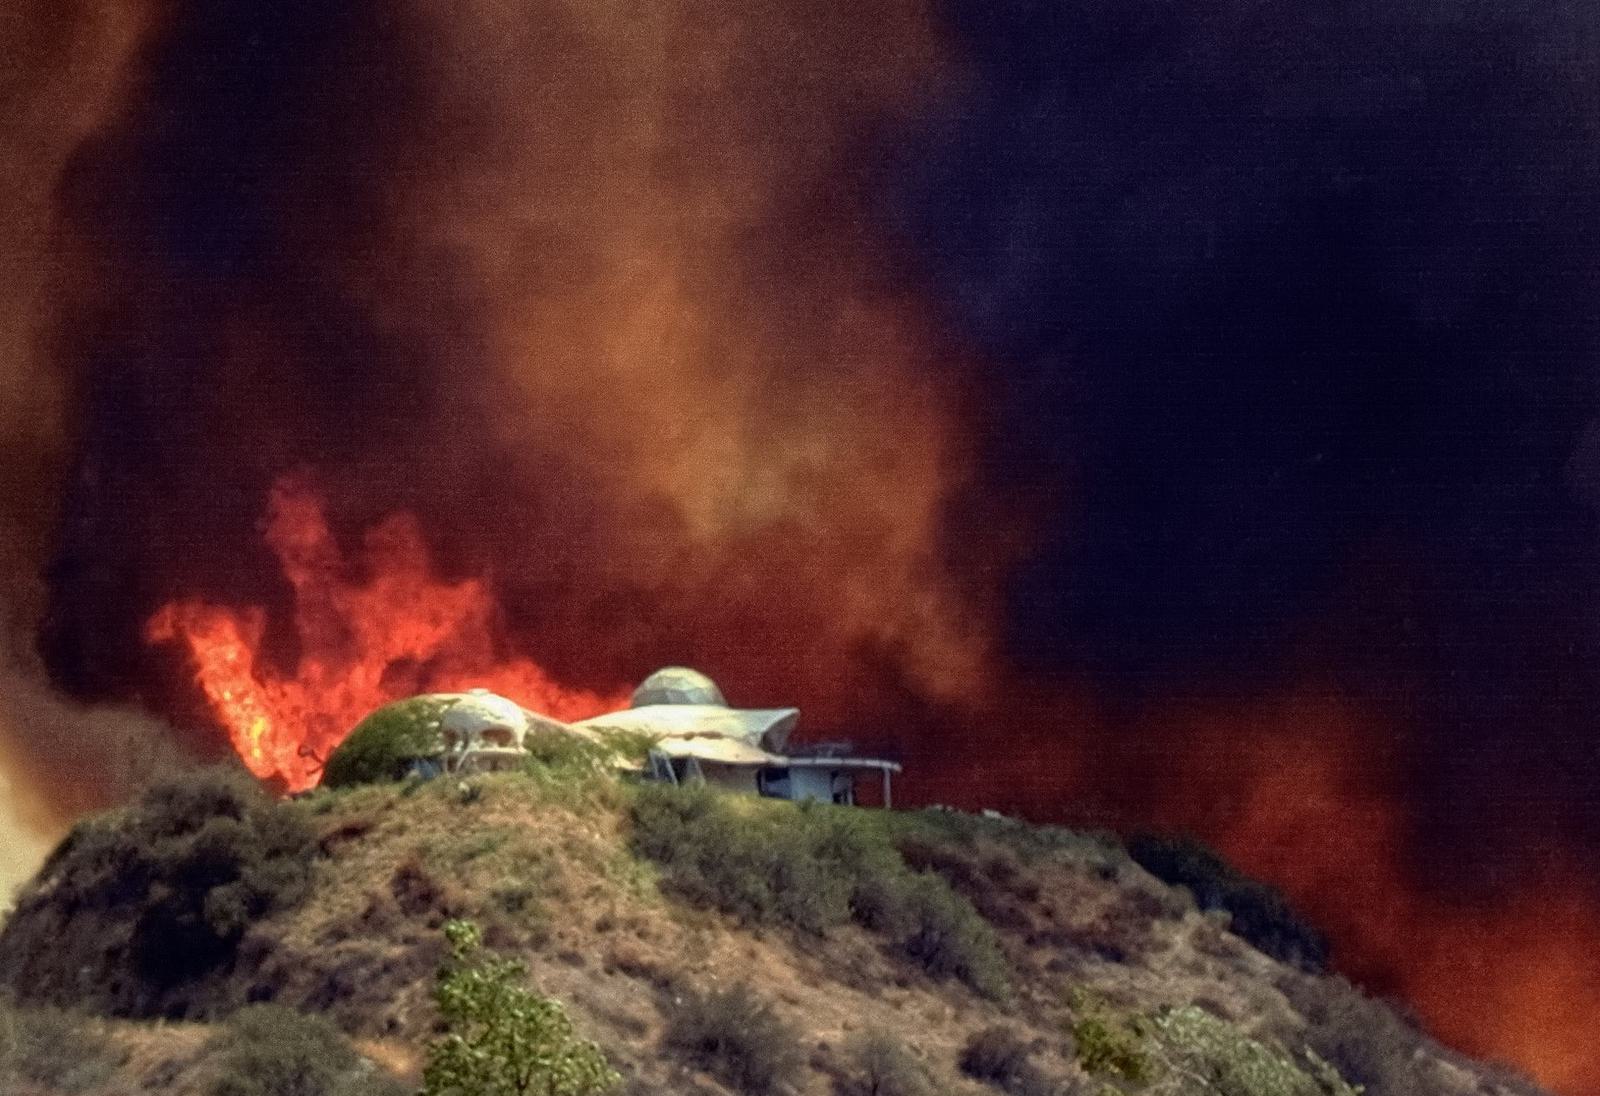 This Monolithic Dome house in California had a wildfire run right over the top of it.